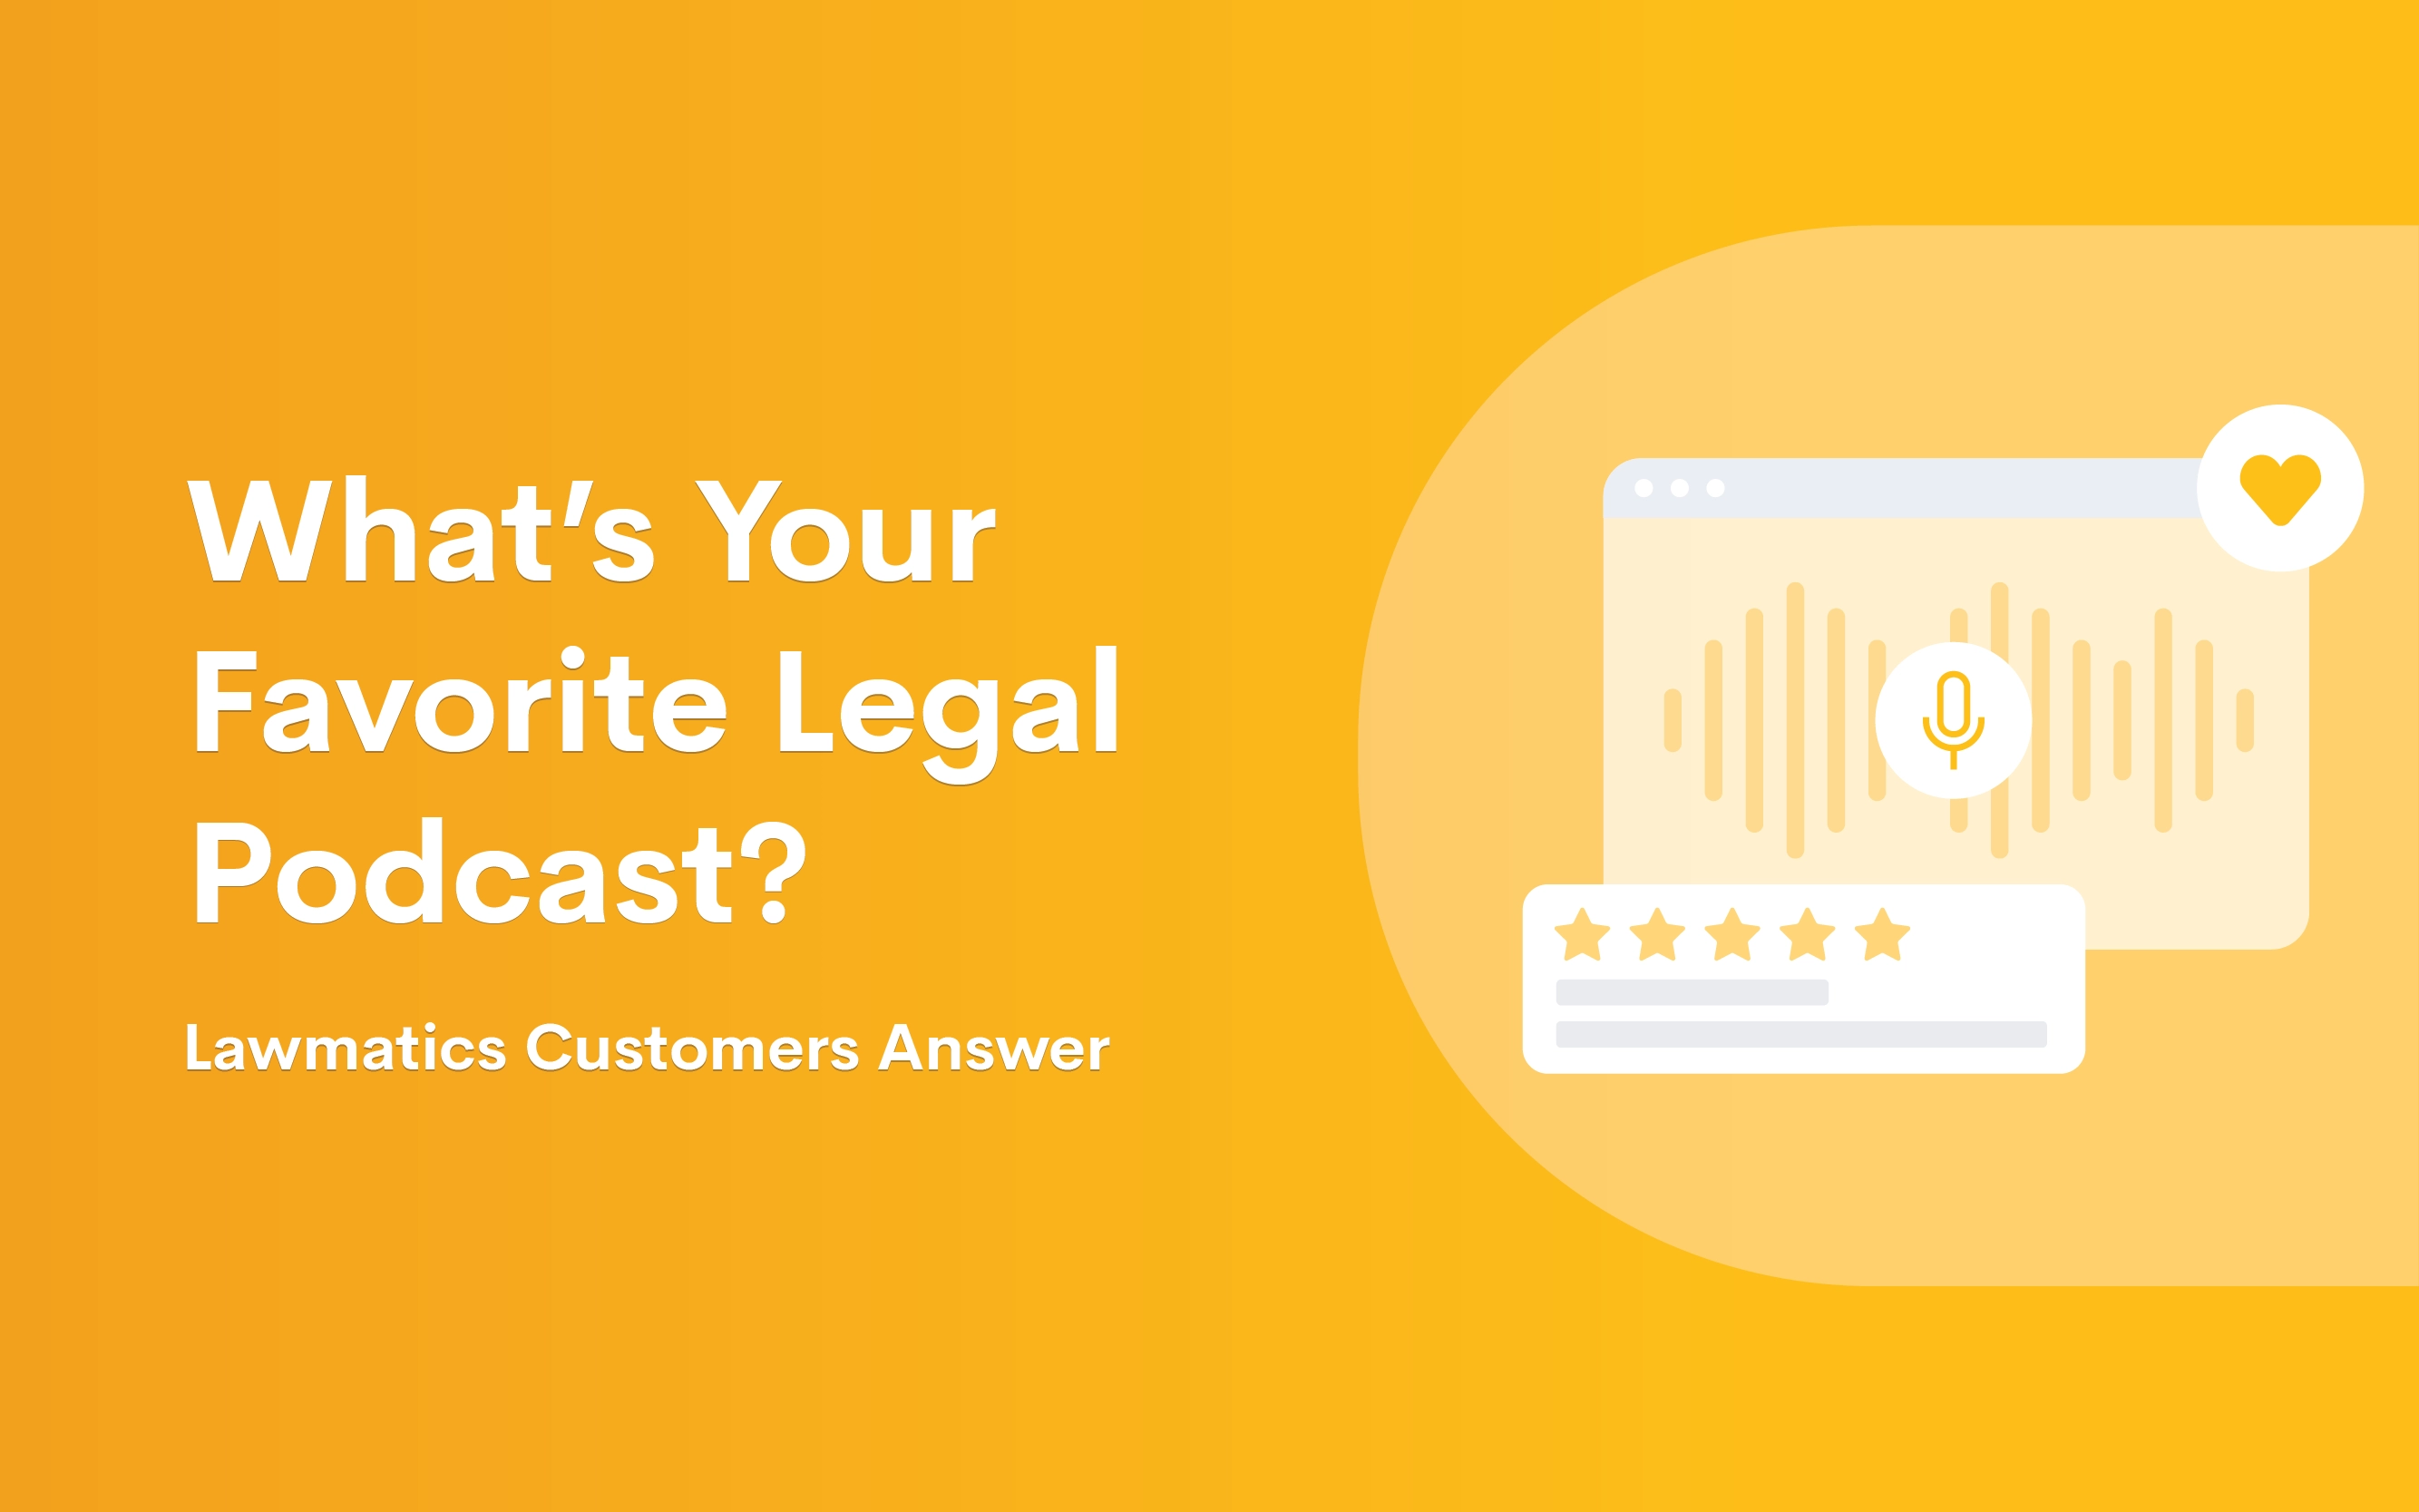 What’s Your Favorite Legal Podcast? Lawmatics Customers Answer